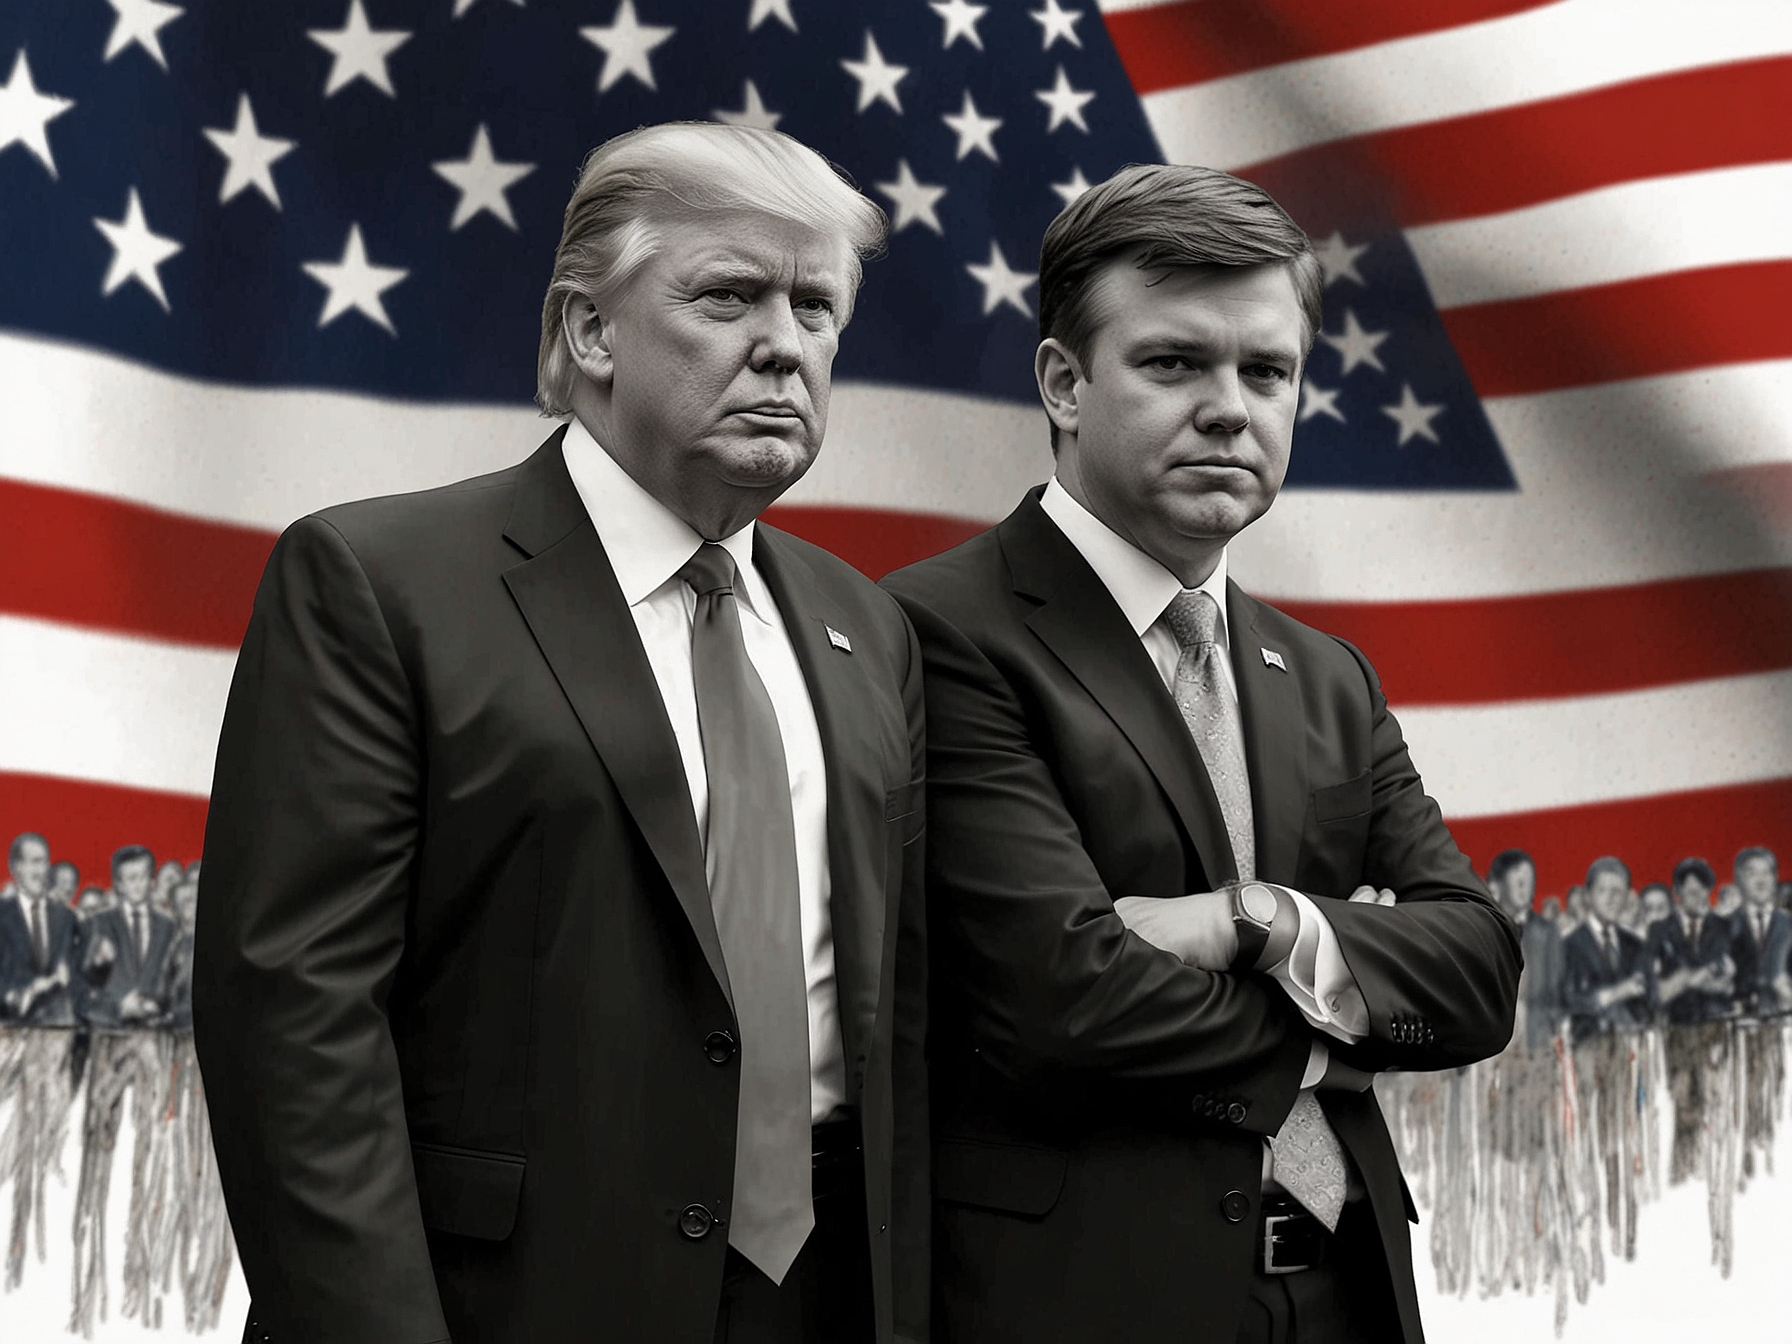 Donald Trump and Sen. J.D. Vance at a political rally, showcasing their alliance and Trump's influence within the Republican Party.